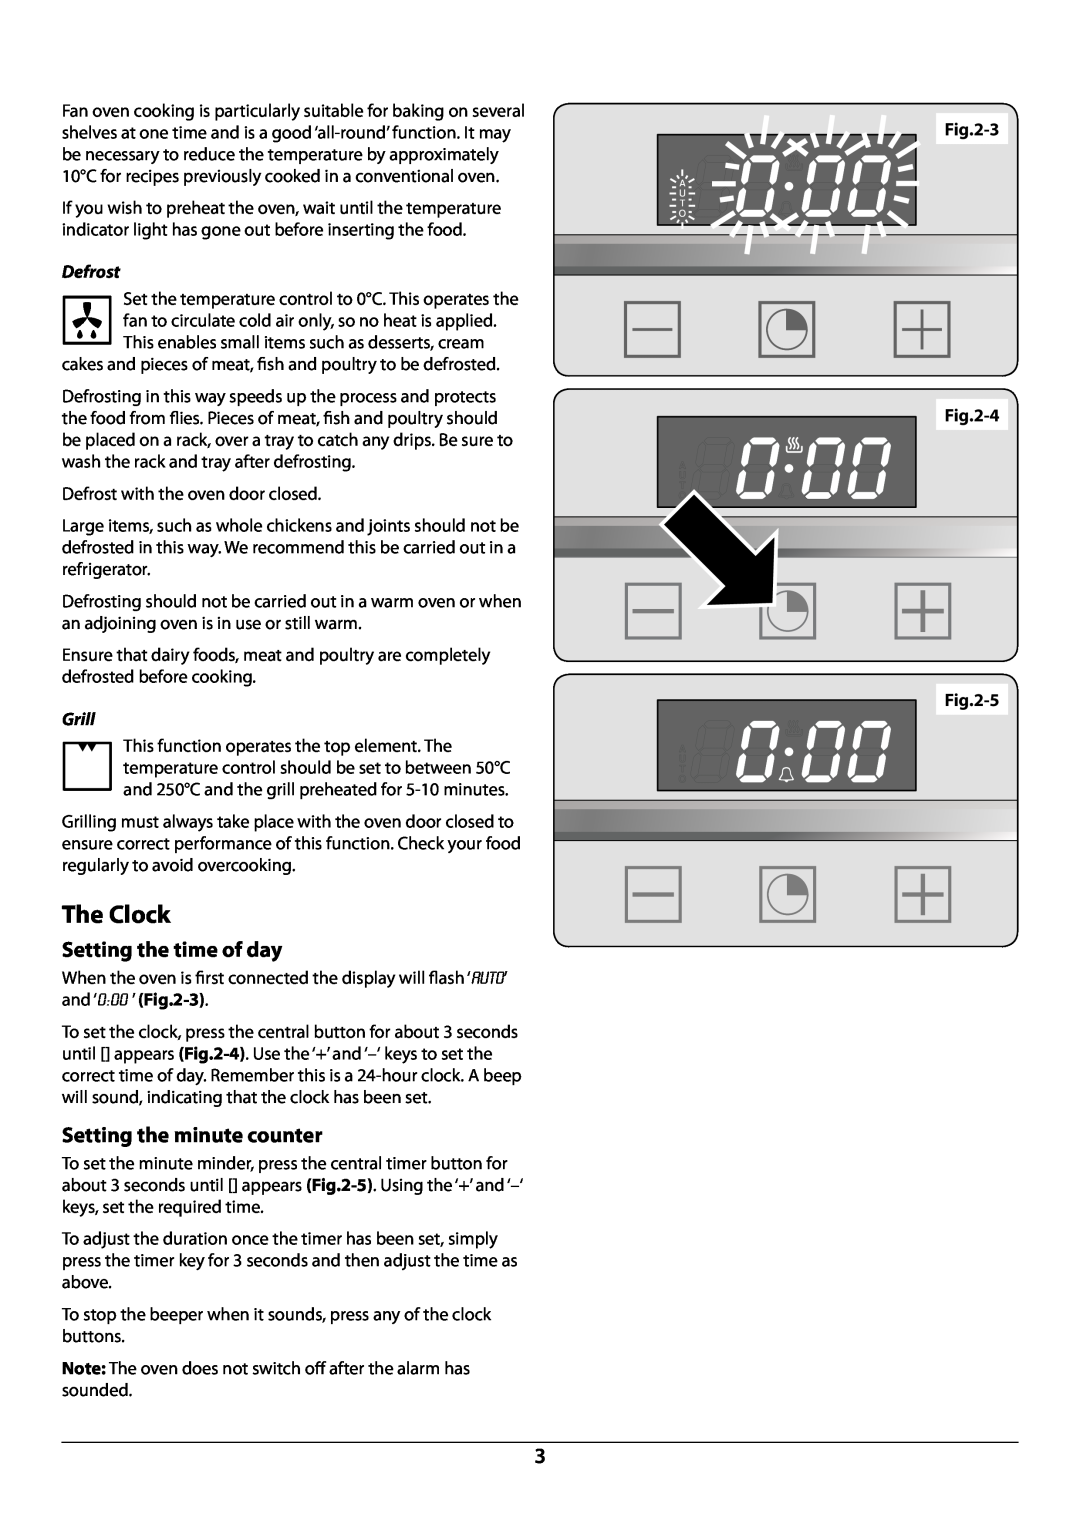 Rangemaster R604 manual The Clock, Setting the time of day, Setting the minute counter, Defrost, Grill 